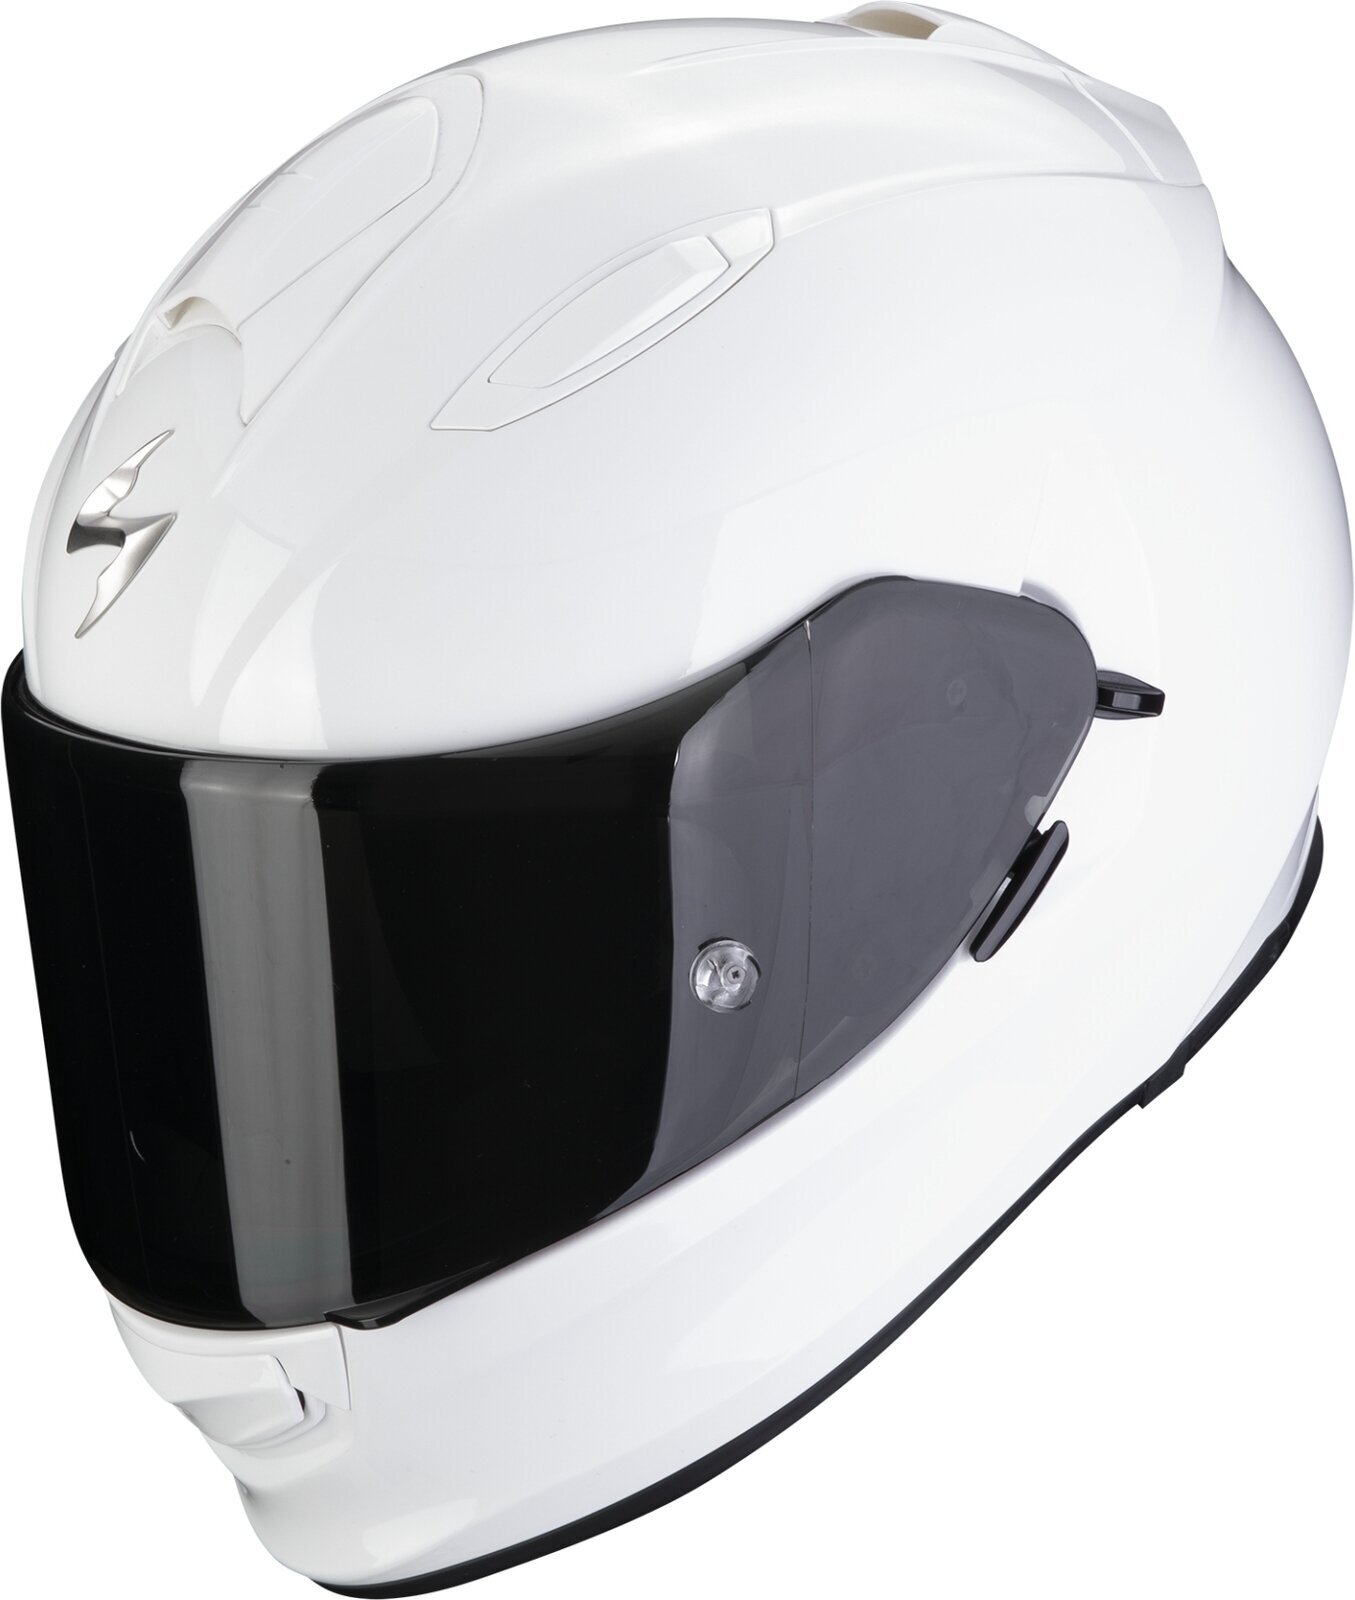 Kask Scorpion EXO 491 SOLID White M Kask